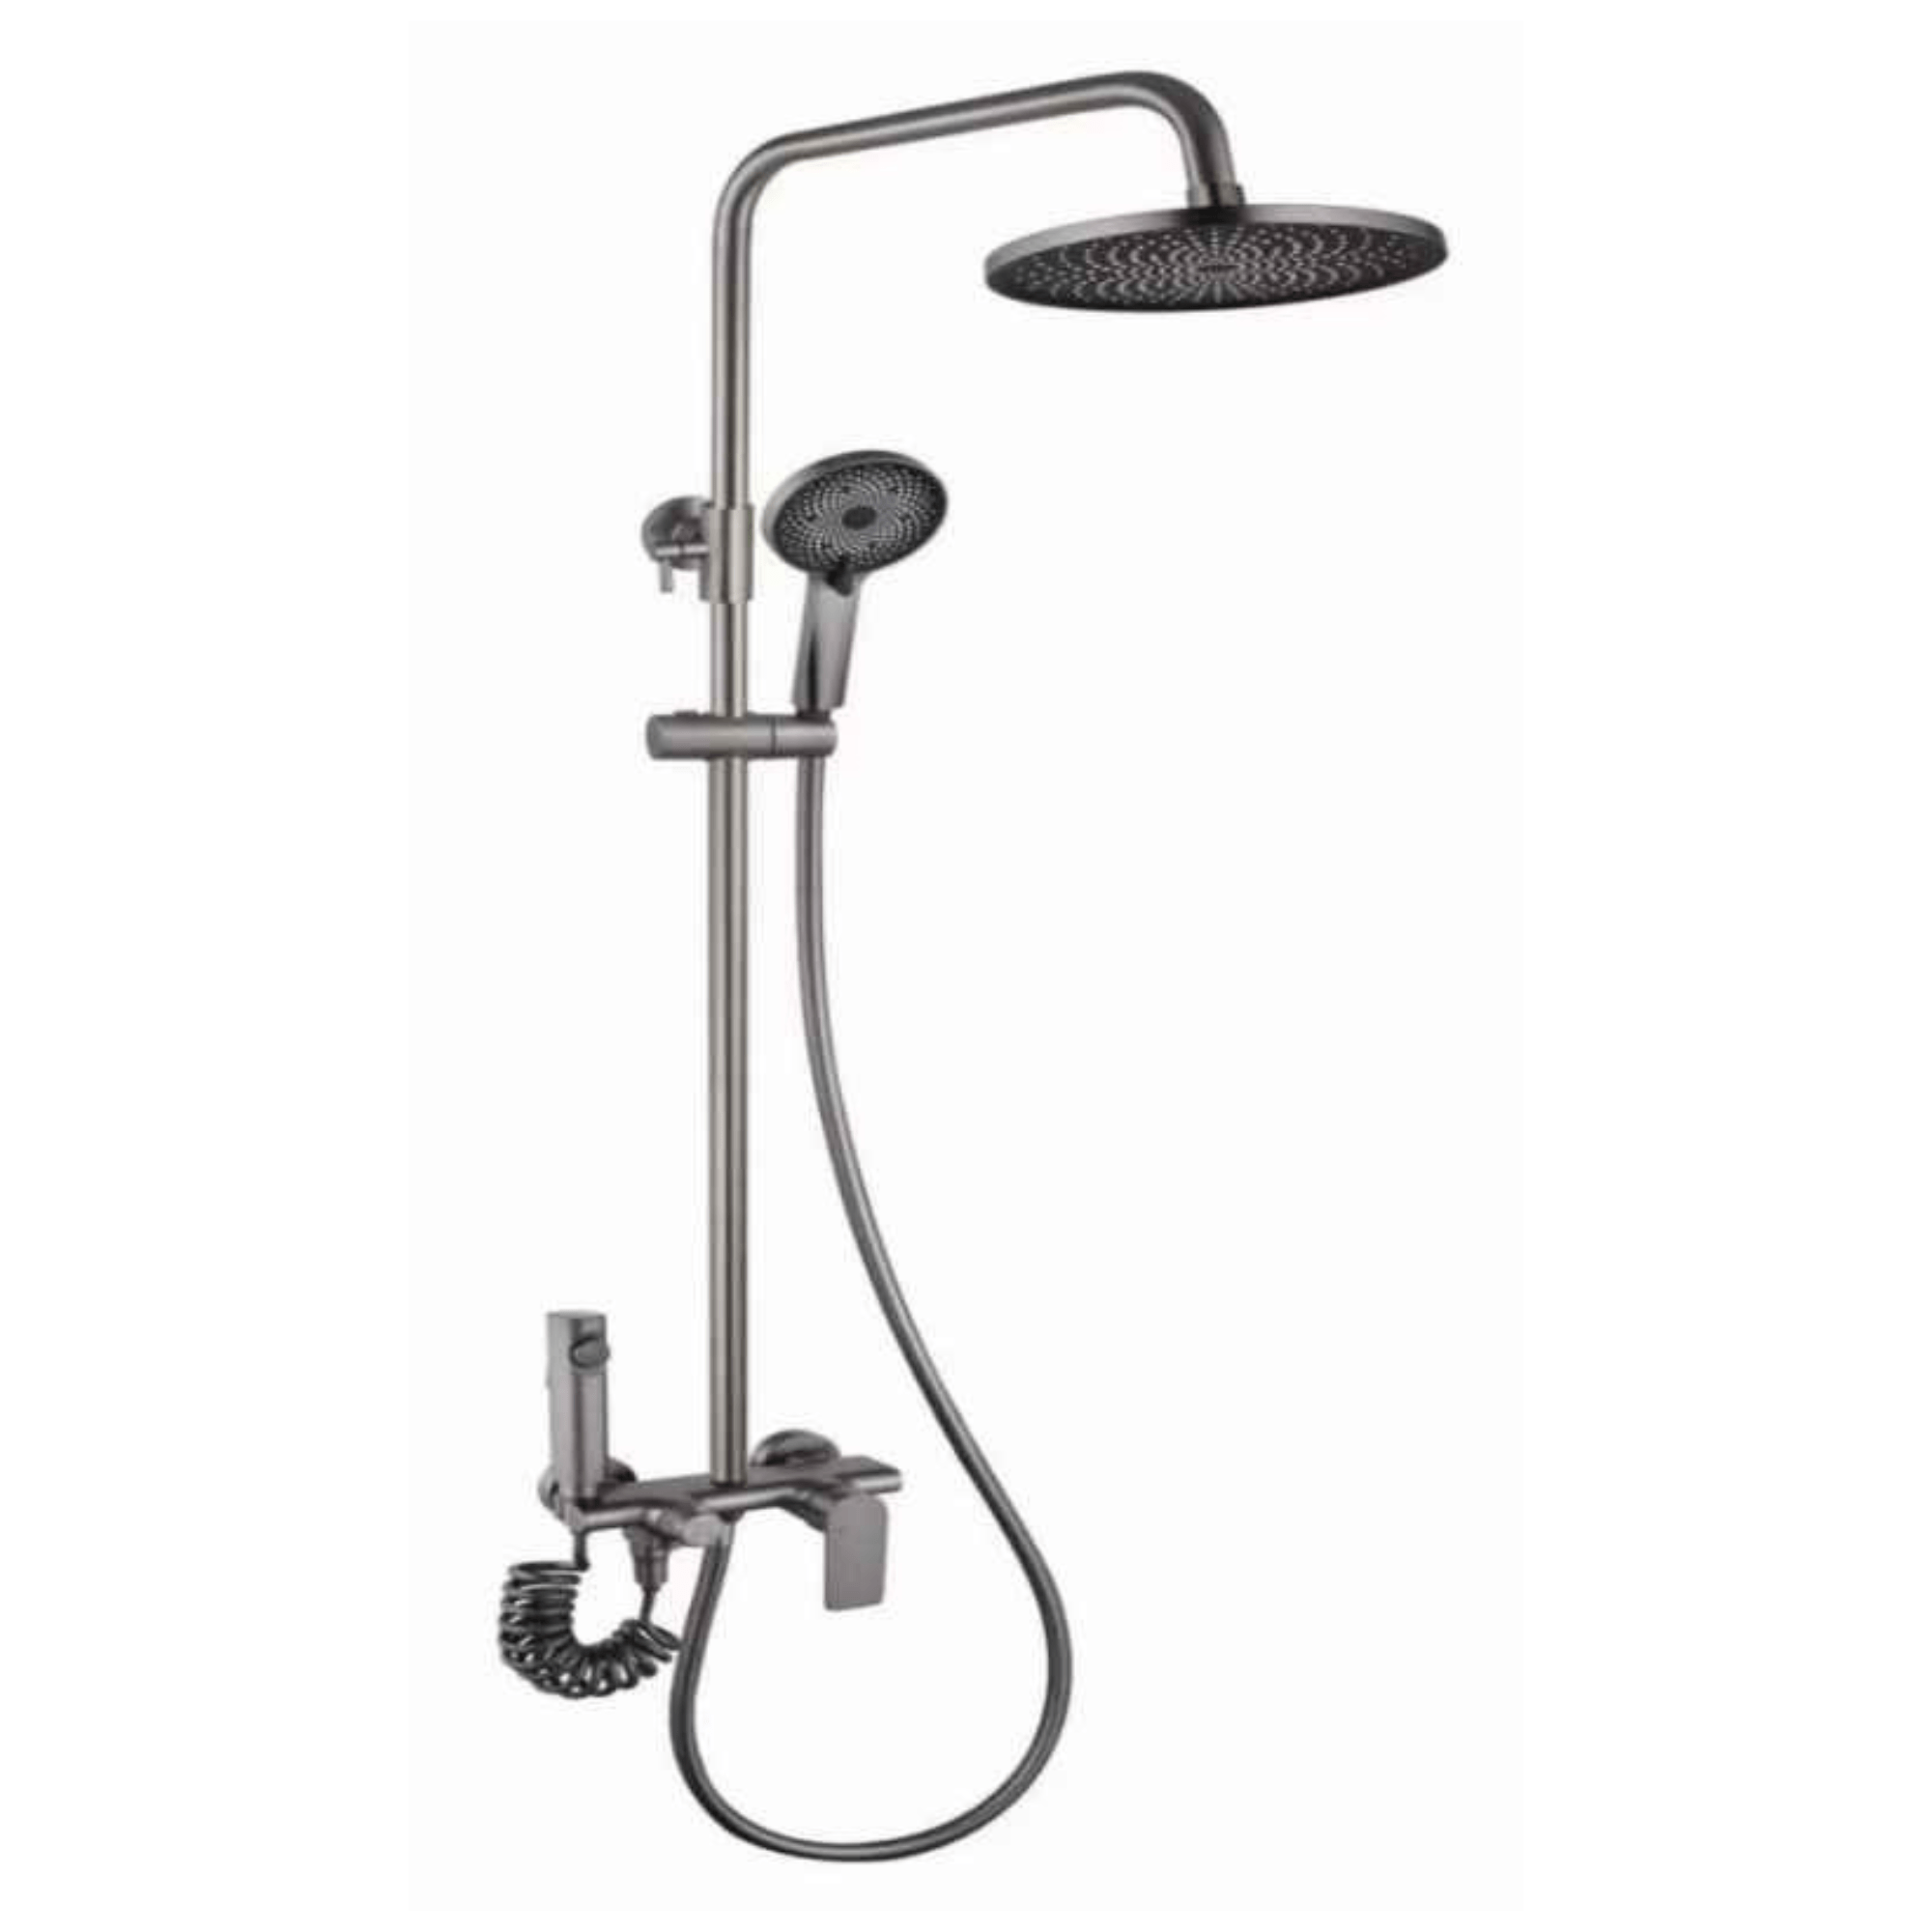 Buy Bathroom Matte Grey Multifunctional Shower Set with Dual Shower Head, Shower Faucet Set with Spray Gun - RS-22328QC | Shop at Supply Master Accra, Ghana Shower Set Buy Tools hardware Building materials